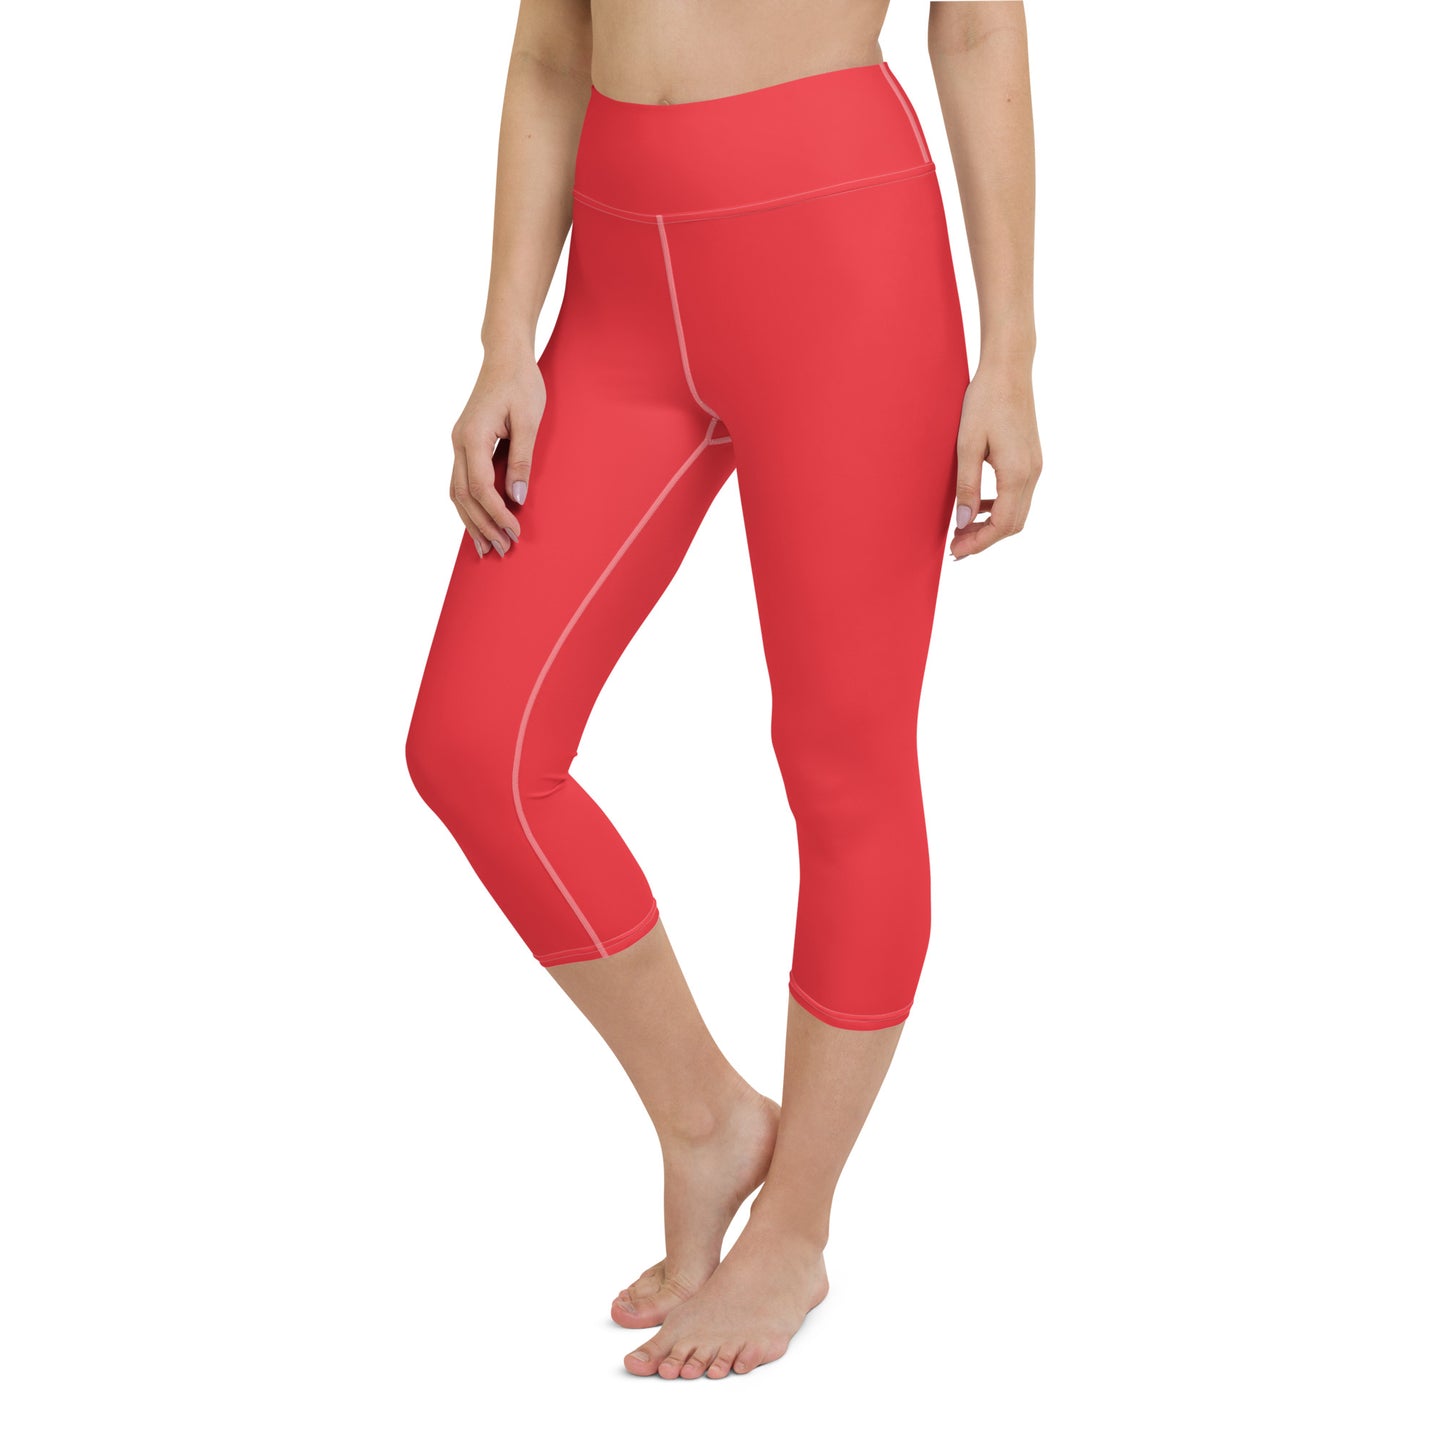 Nord Solid Red Capri High Waist Yoga Leggings / Pants with Inside Pocket